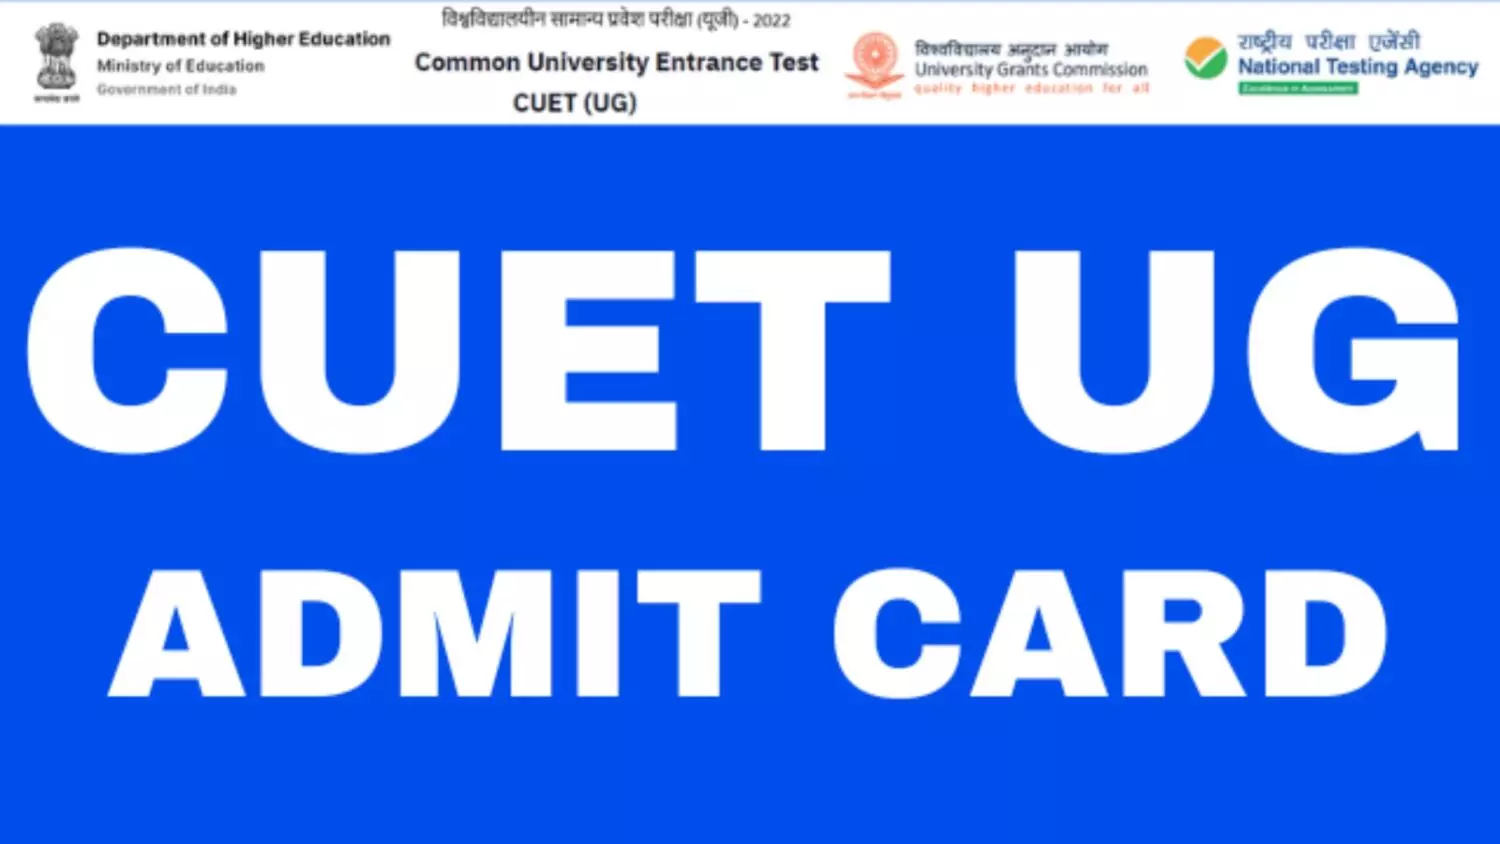 cuet ug admit card 2022 nta released phase 5 cuet ug admit card know download process